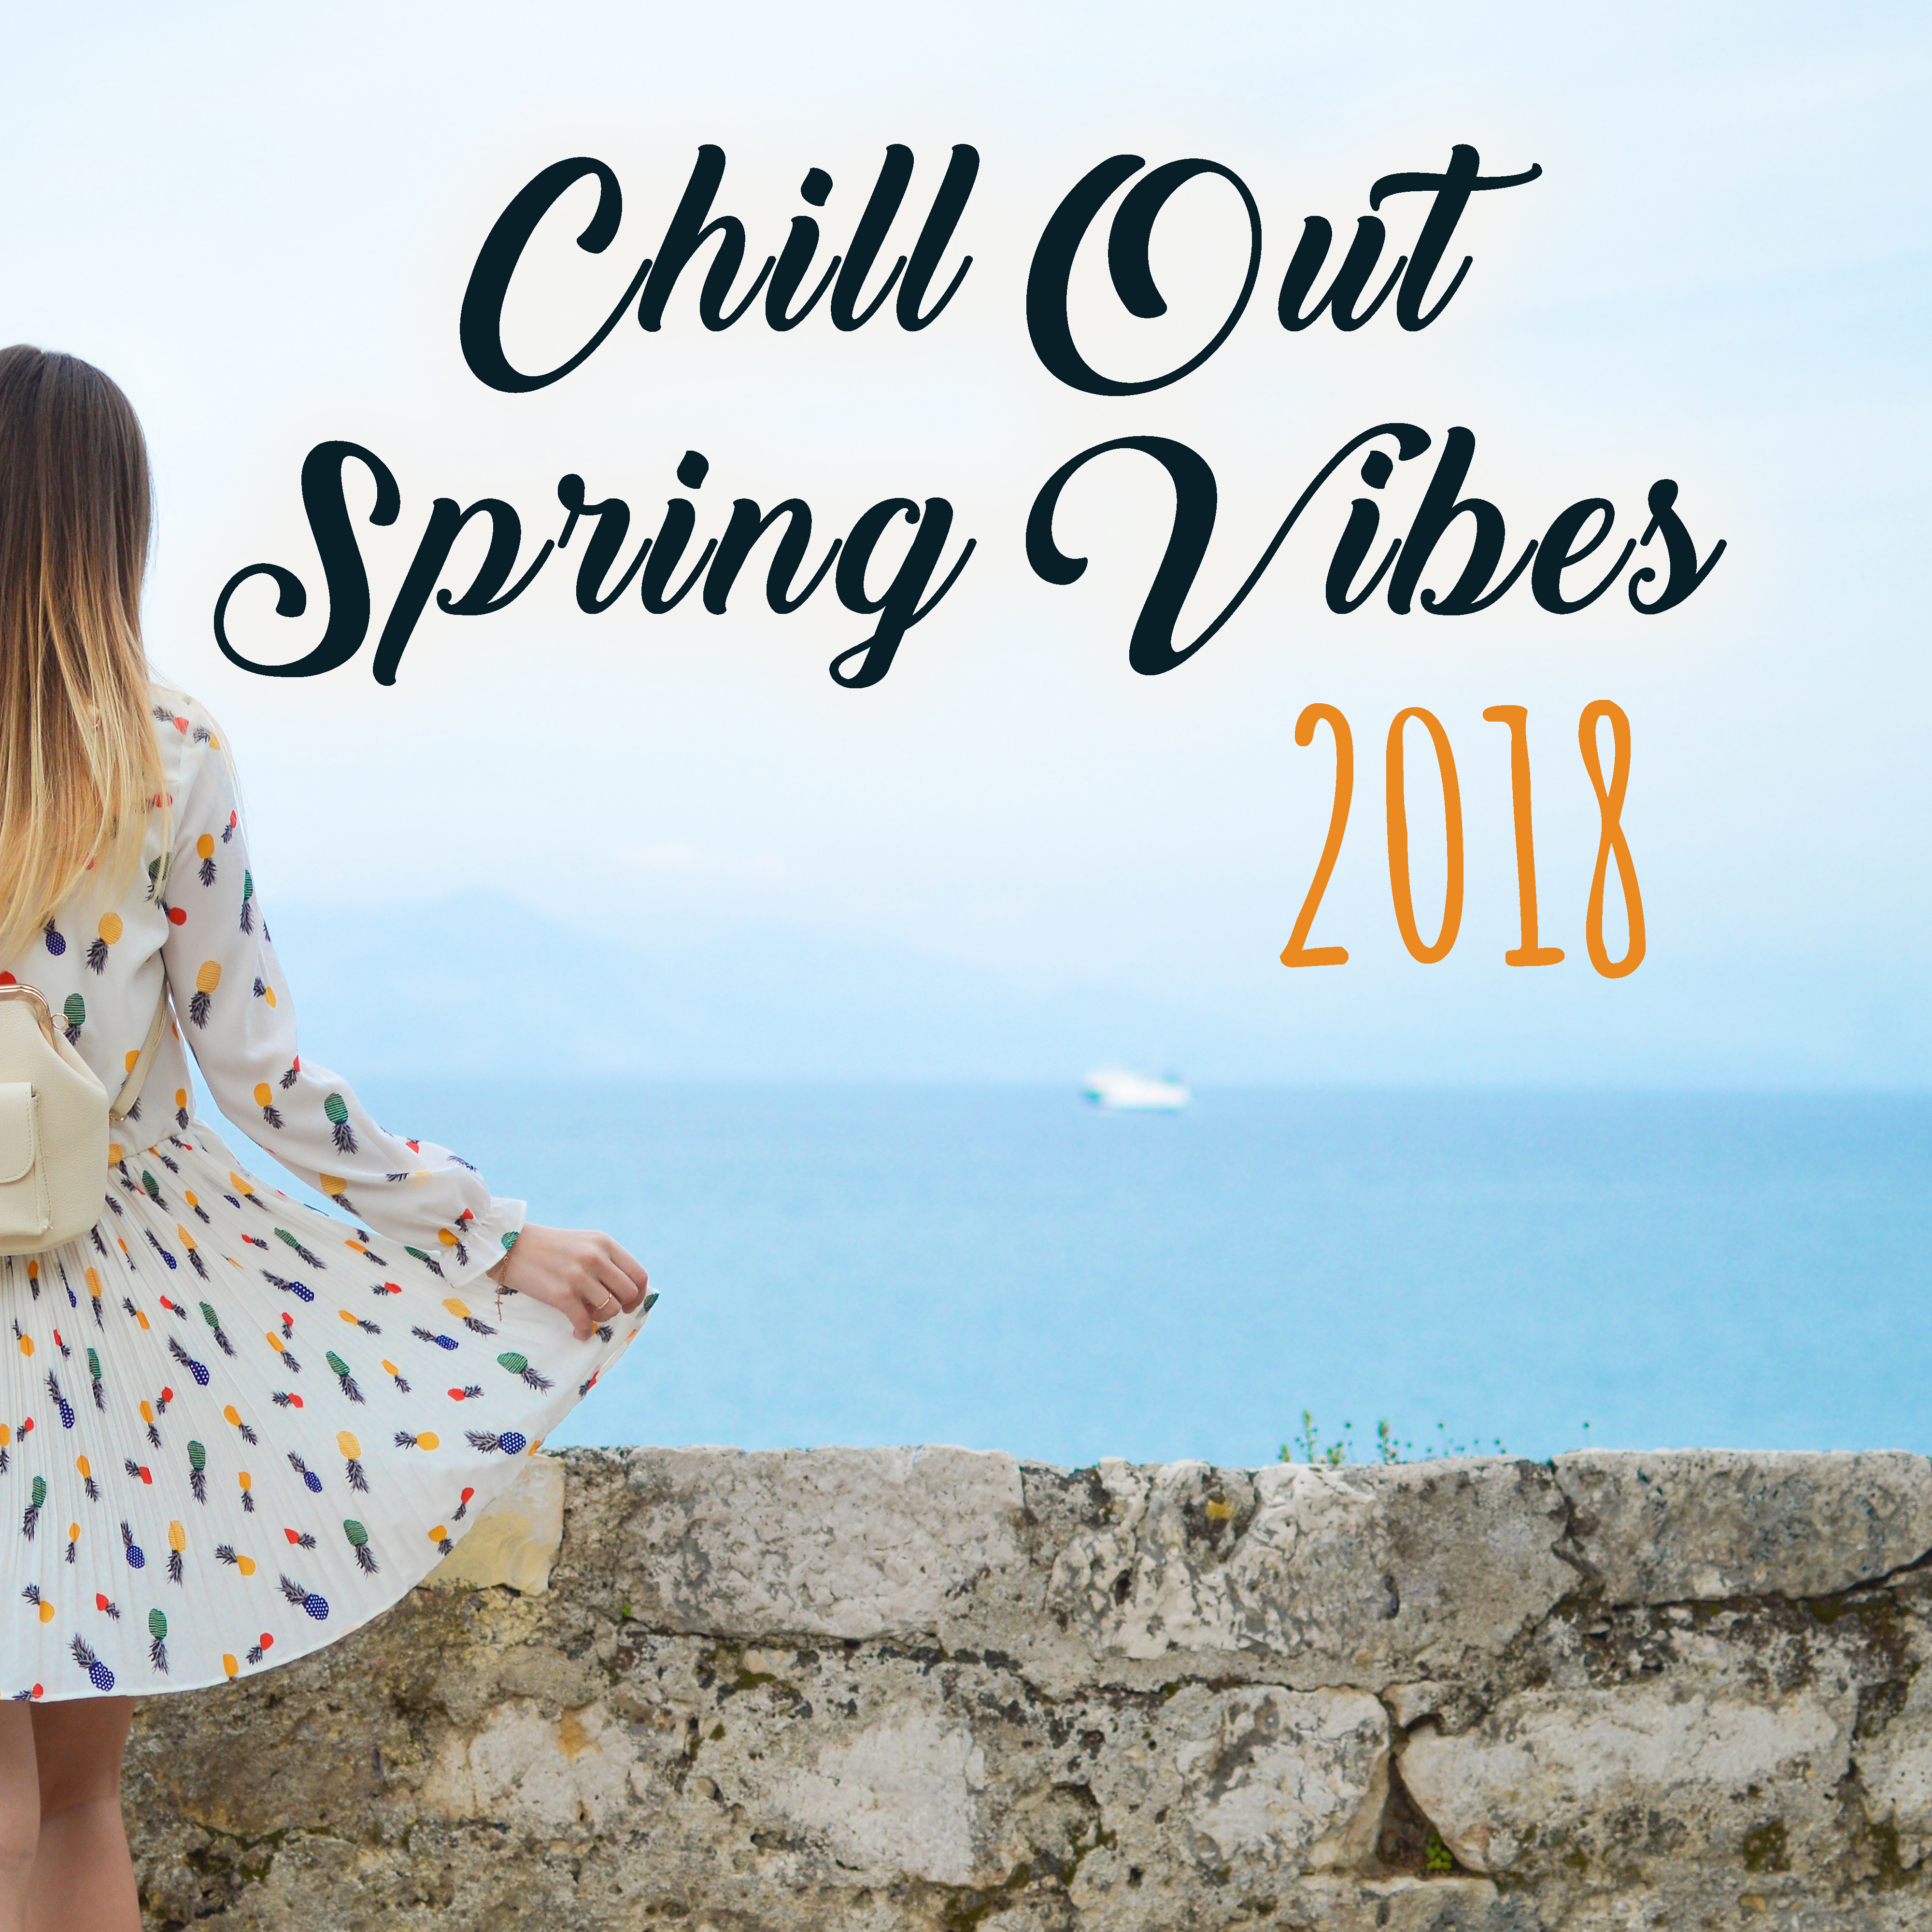 Chill Out Spring Vibes 2018